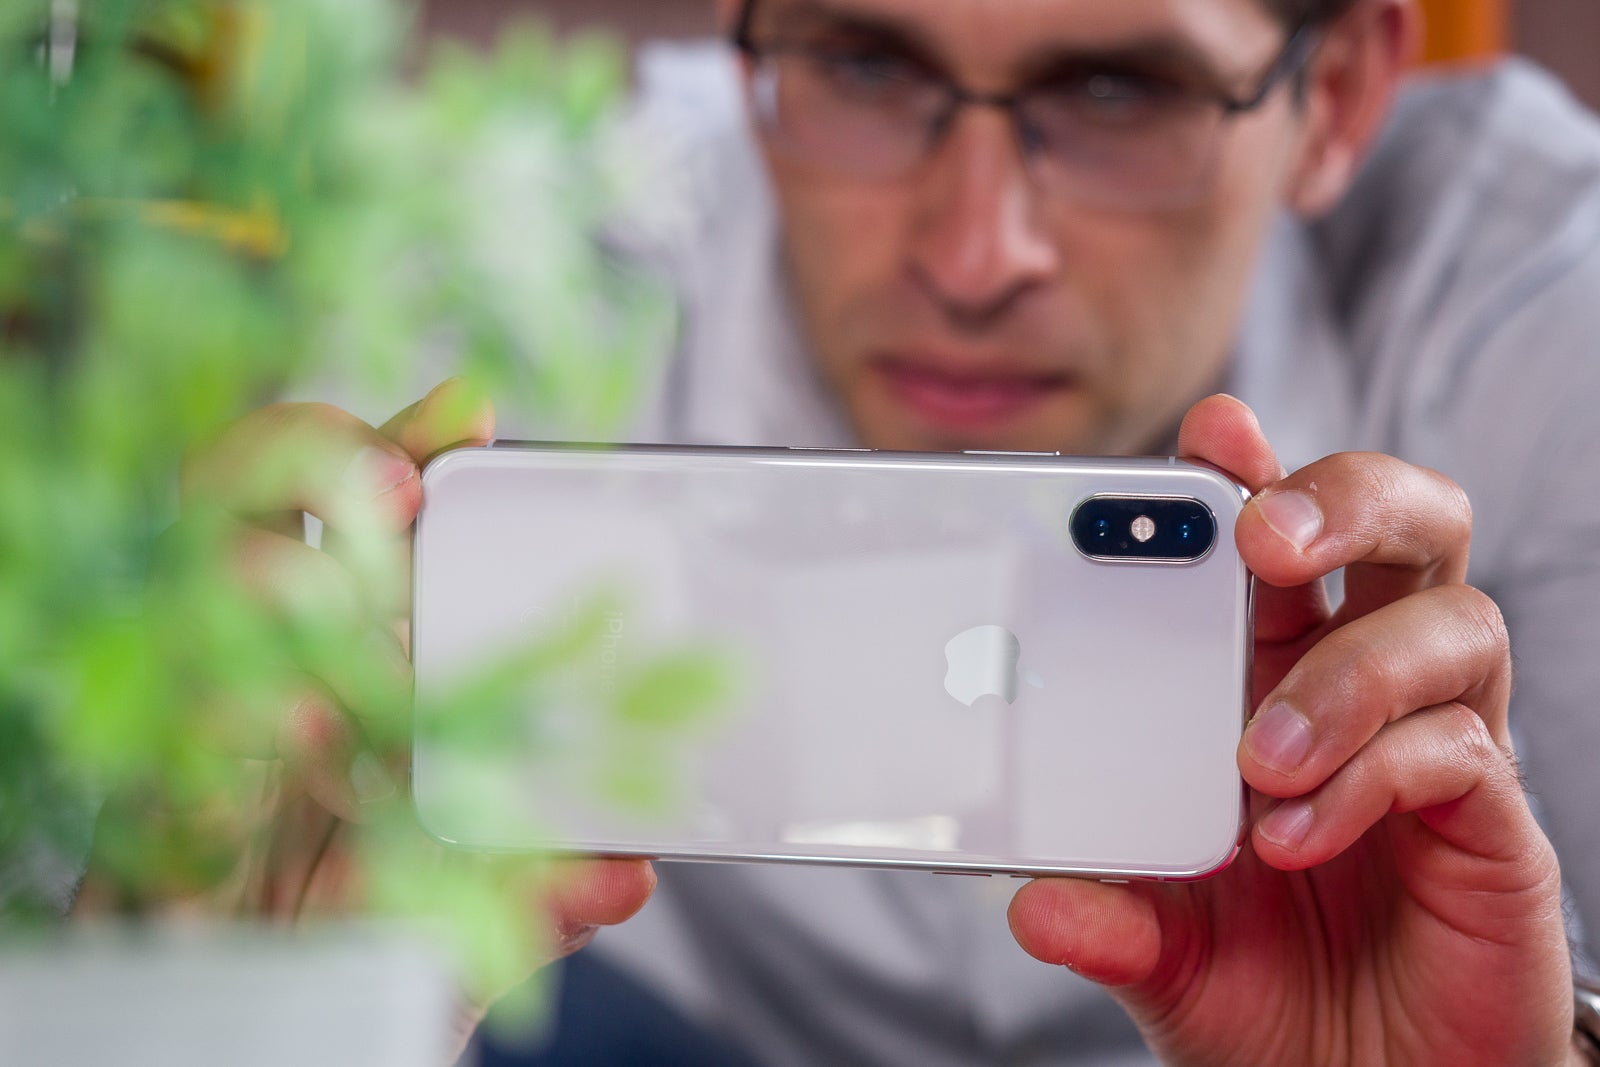 First ever switch from Android to iPhone as a daily driver, here’s what I liked and what I didn’t